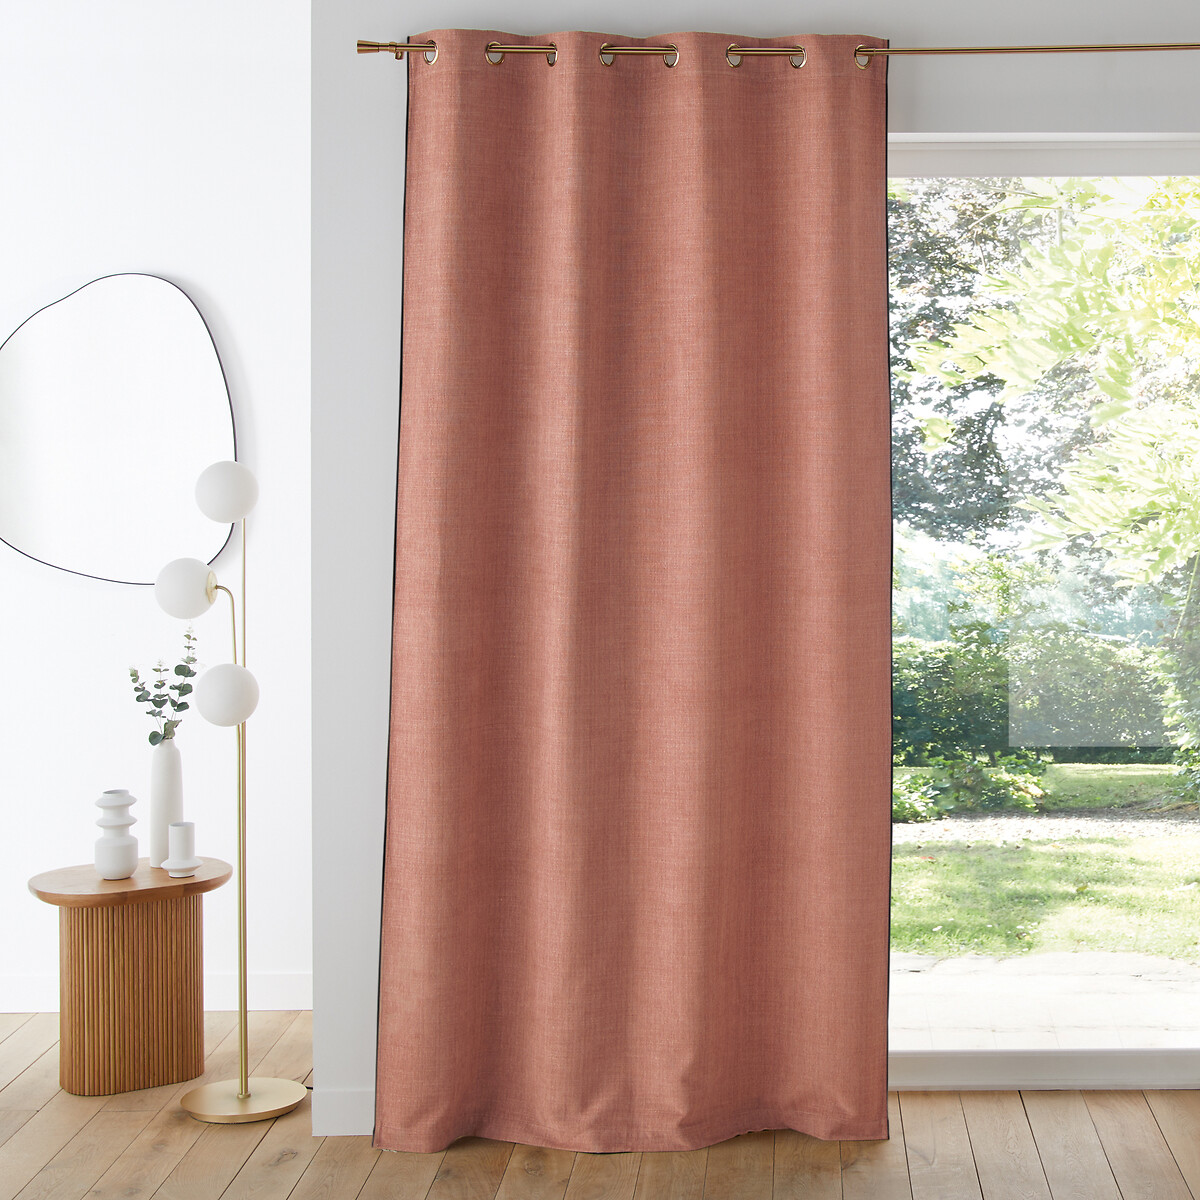 Figuera Chenille Effect Eyelet Curtain